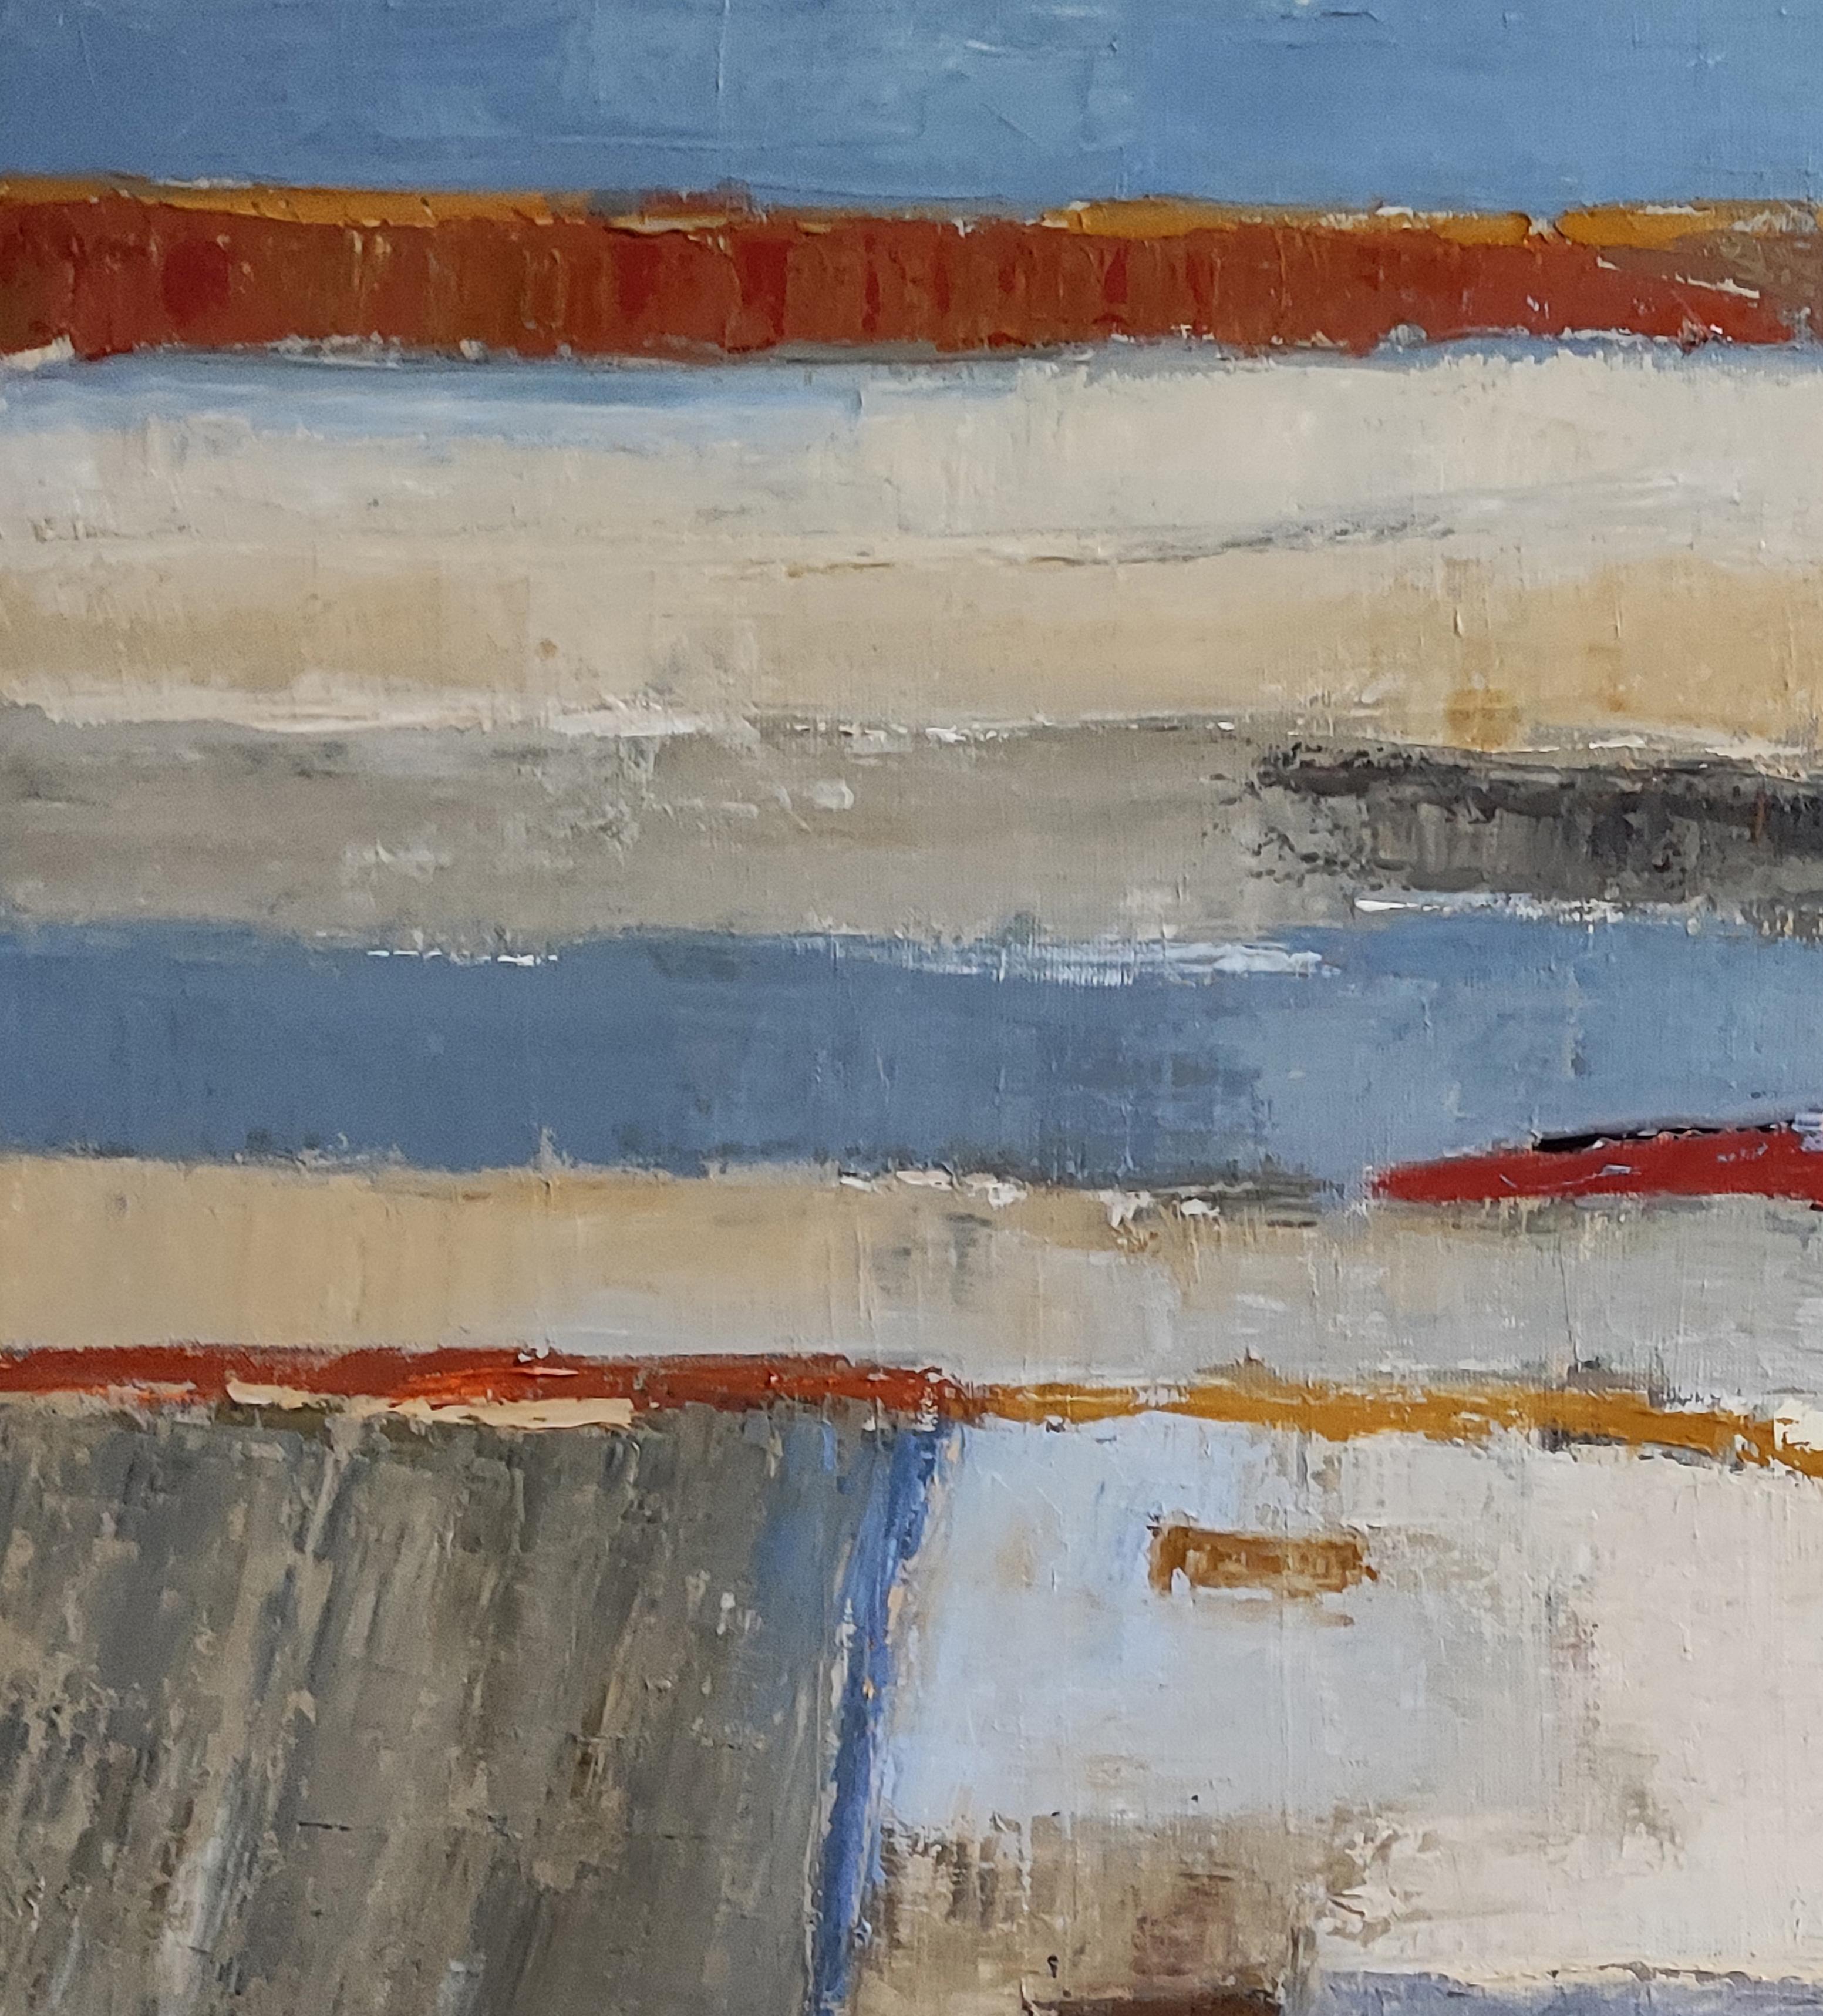 Abstract landscape in oil and knife.
The tangle of plots of fields in Normandy in winter translated by Sophie Dumont. The palette remains in a dominant of blue, greige and ocher with always a multitude of layers which gives a real vibration to the